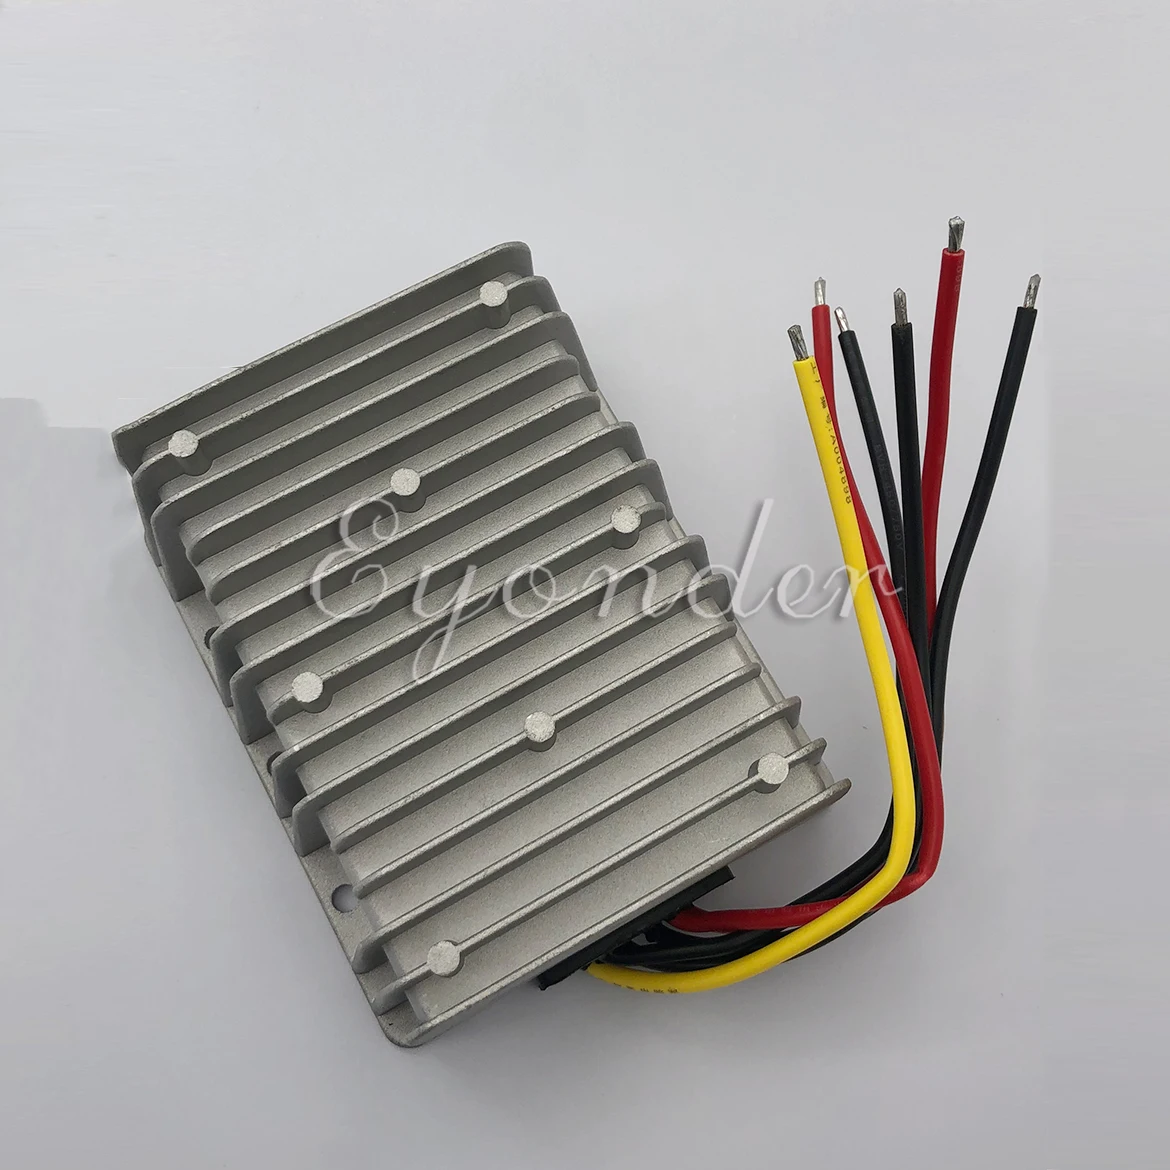 

32v 33v 35v 36v 38v 40v 42v 44v 45v 46v 50v Non isolated 48v to 56v 10a dc dc charger 560w step up boost power supply converter